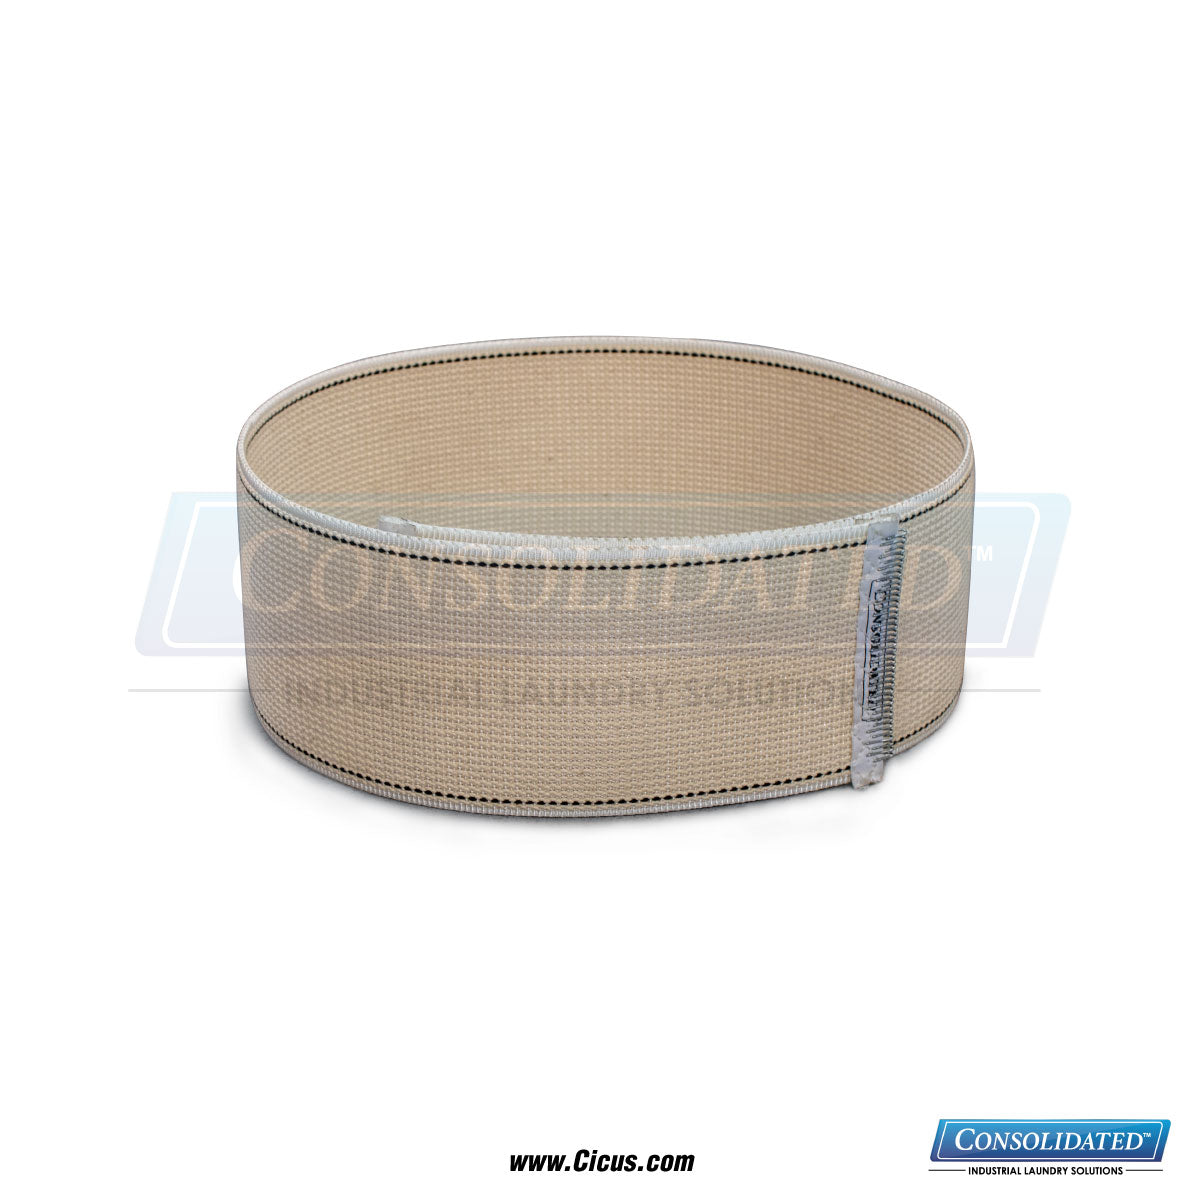 CIC Exclusive Chicago Dryer Canvas Ribbon - 2" x 109" (1001-065)